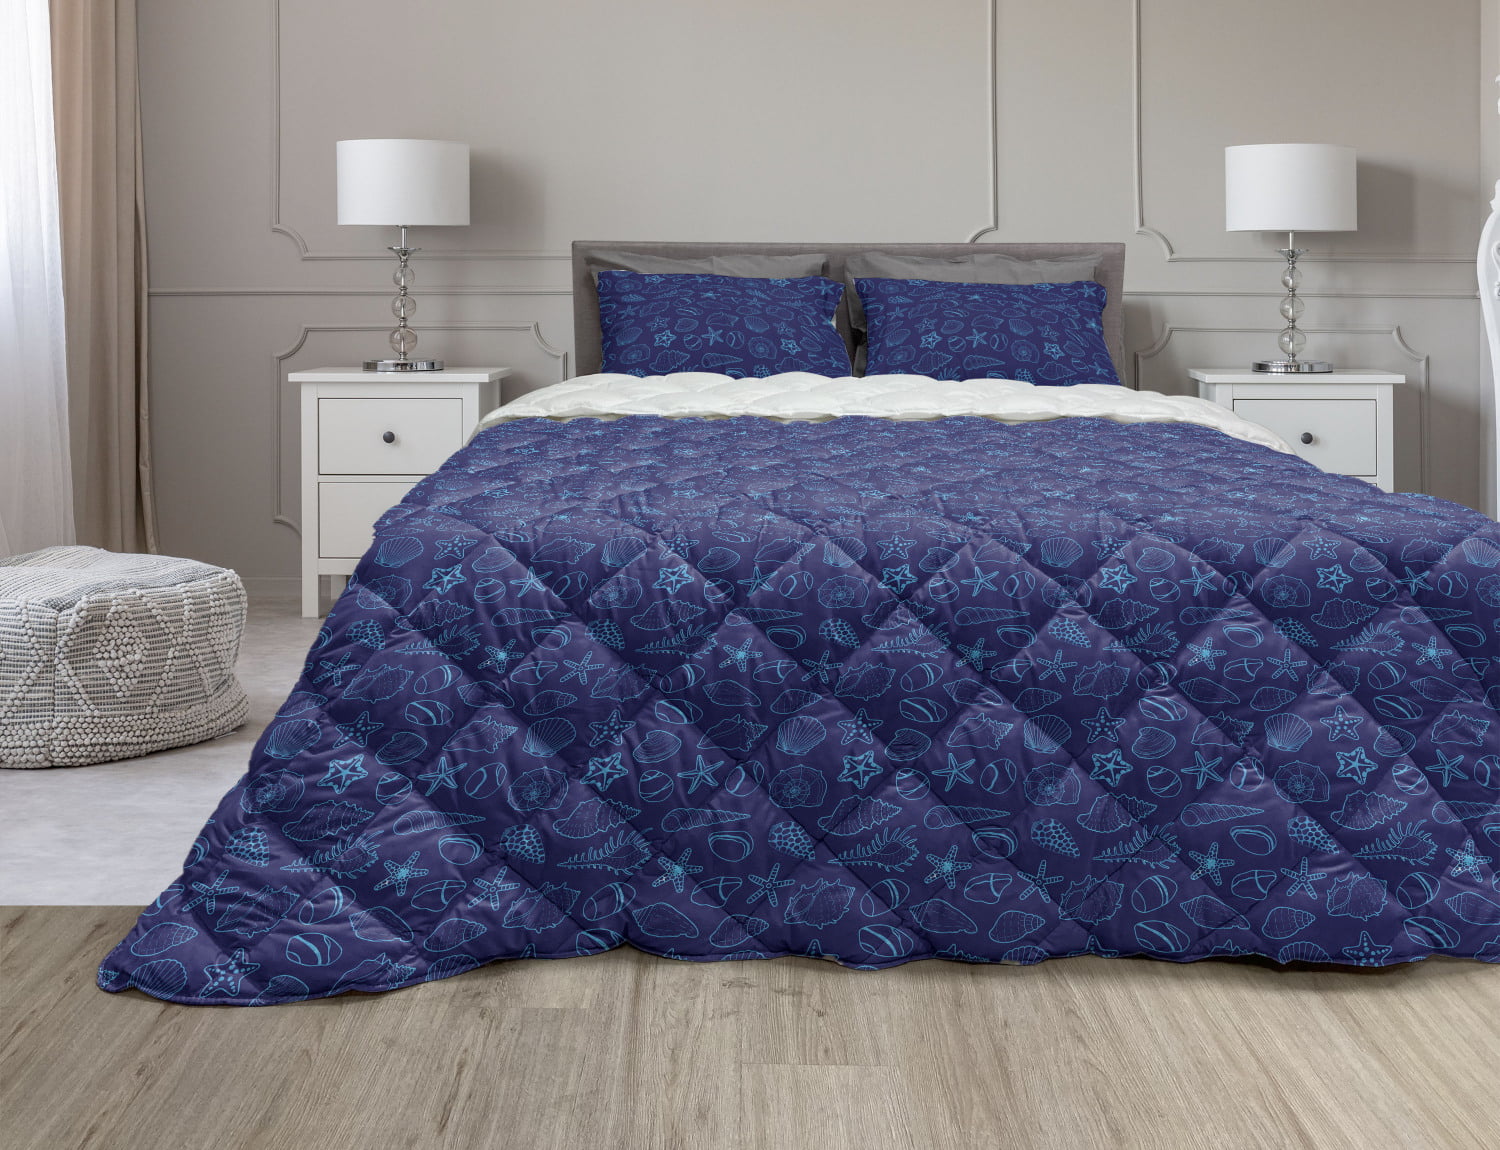 Luxury Blue White Shells Motif Quilted Cotton Comforter Set AND Decorative Shams 